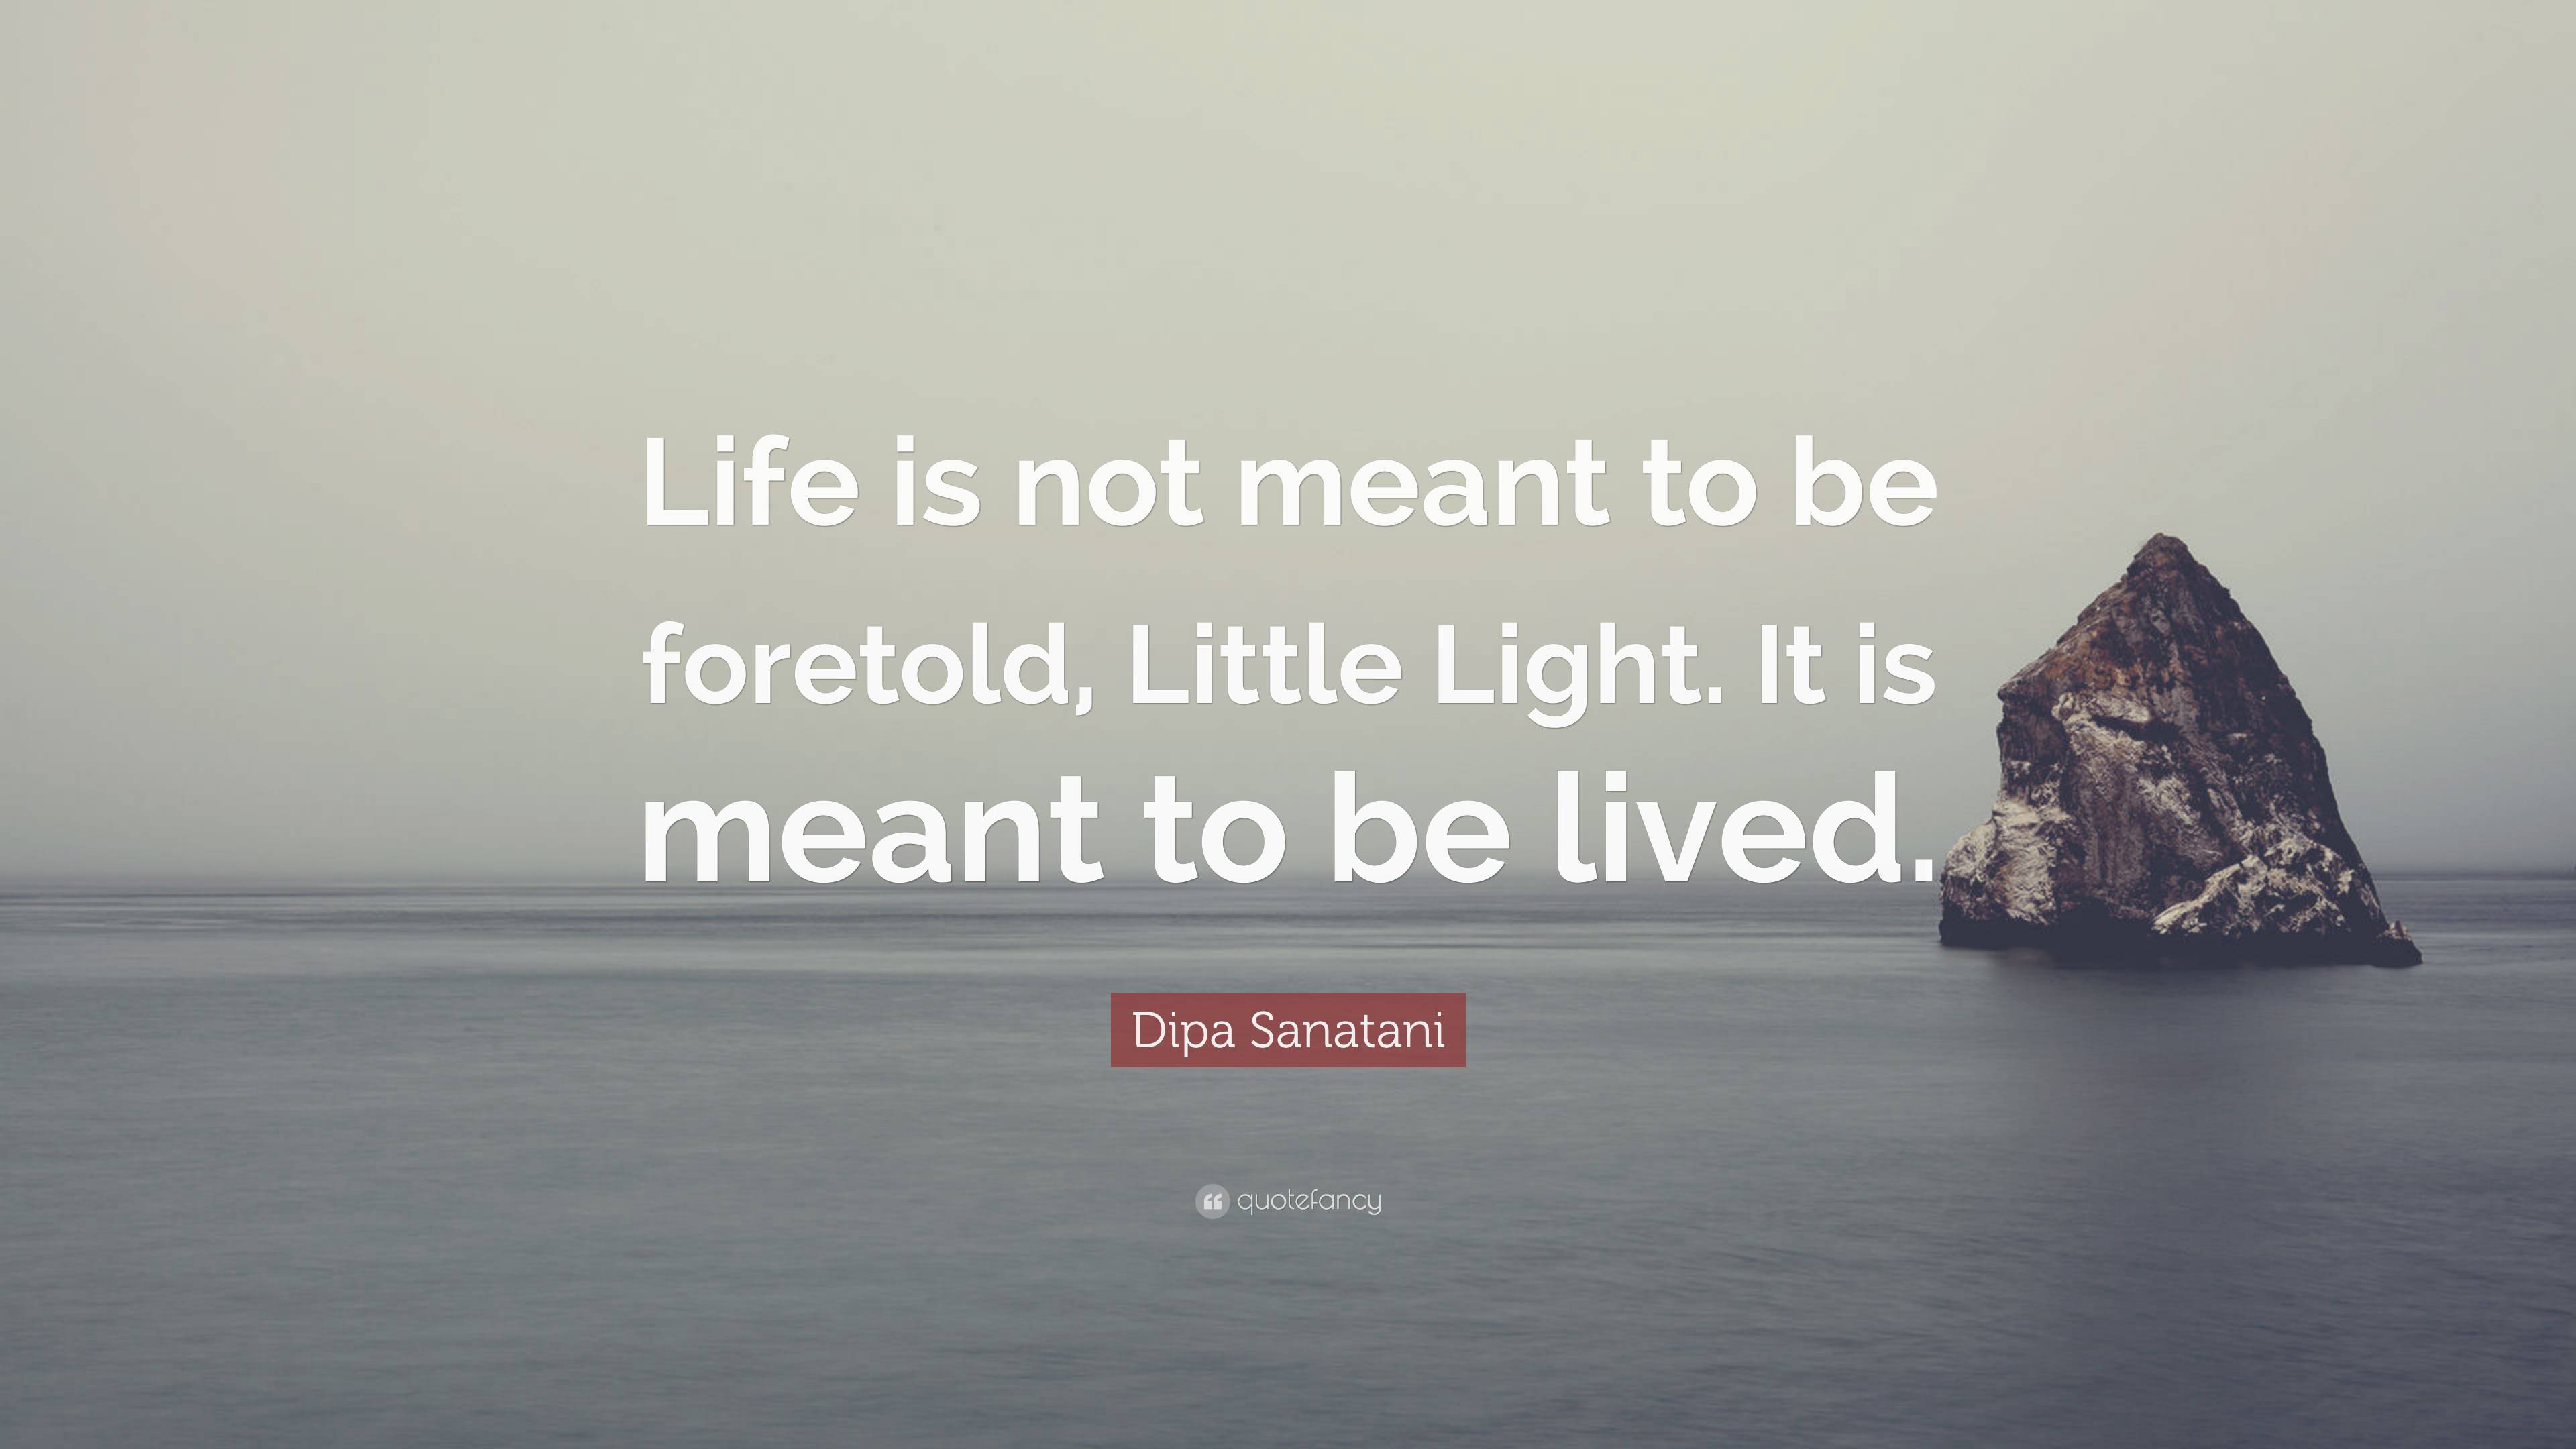 Dipa Sanatani Quote: “Life is not meant to be foretold, Little Light ...